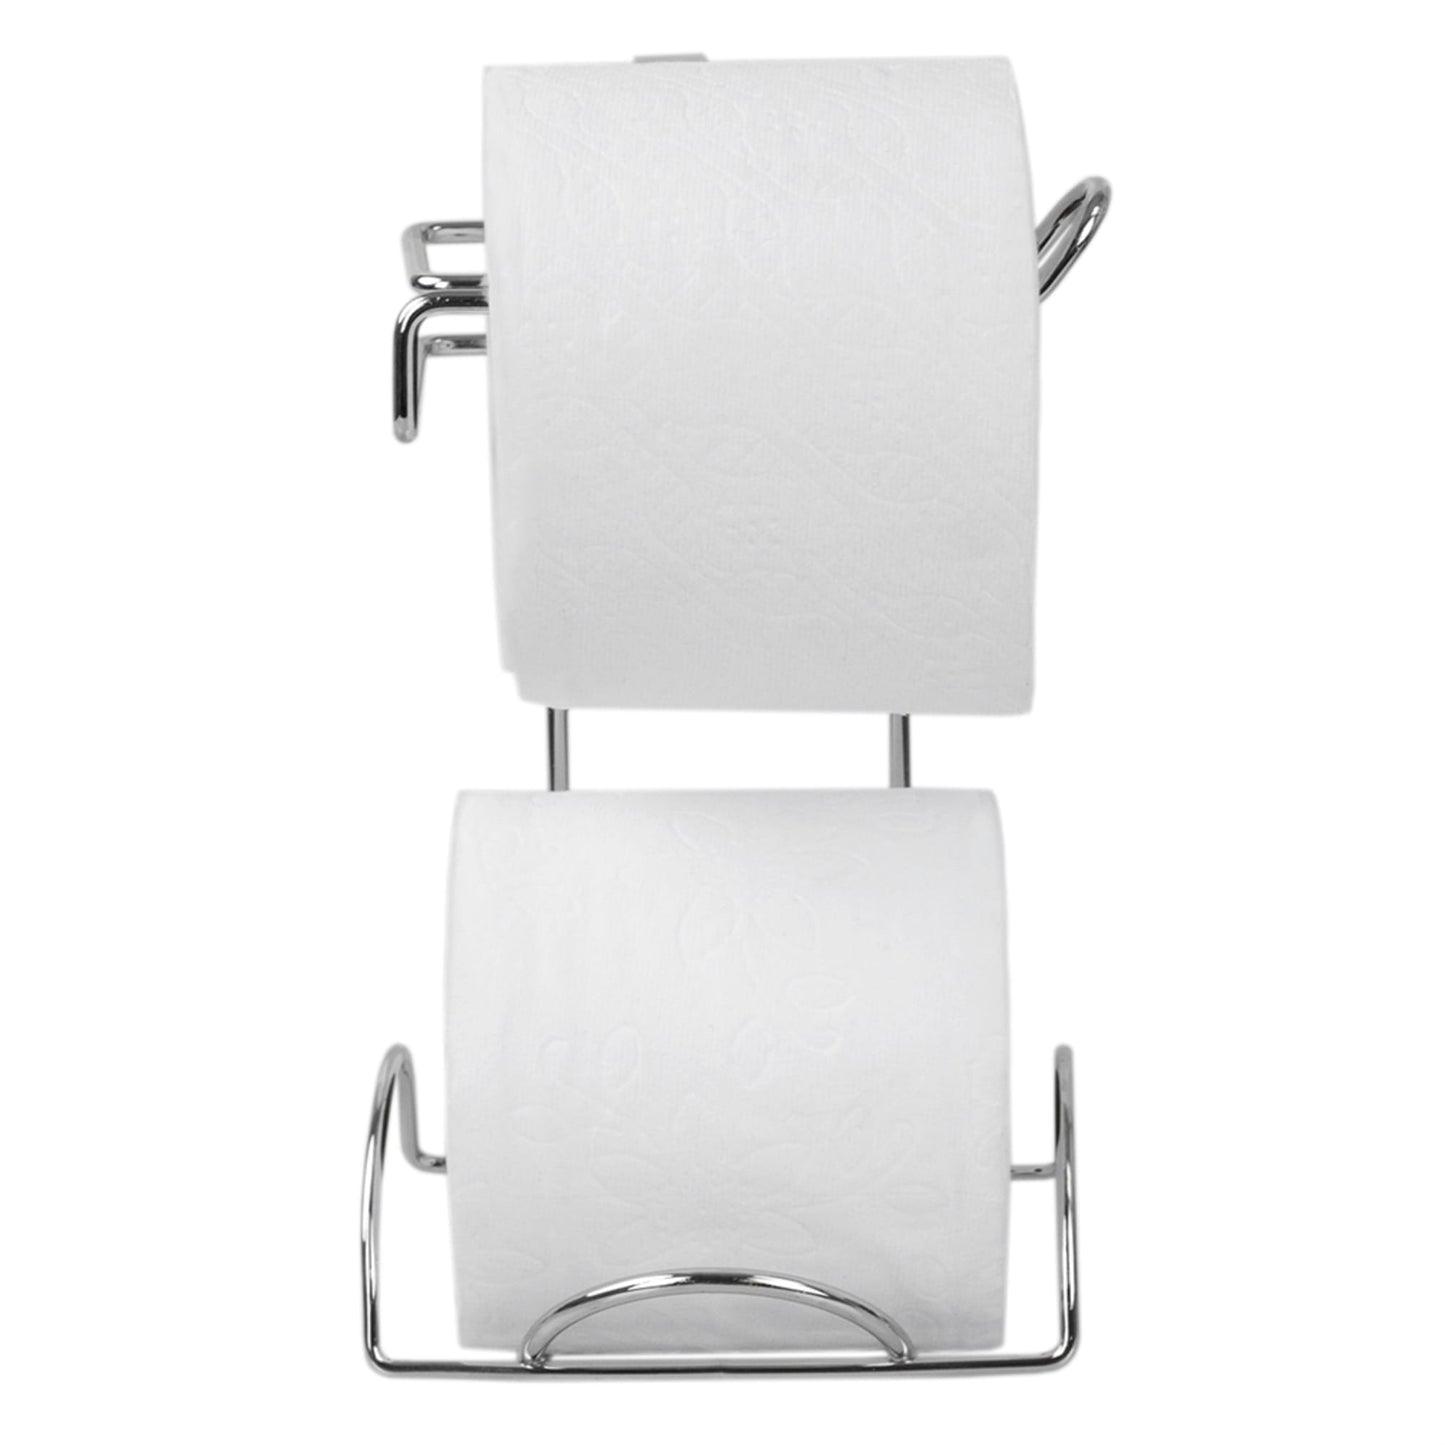 Chrome Plated Steel Over the Tank Toilet Paper Holder